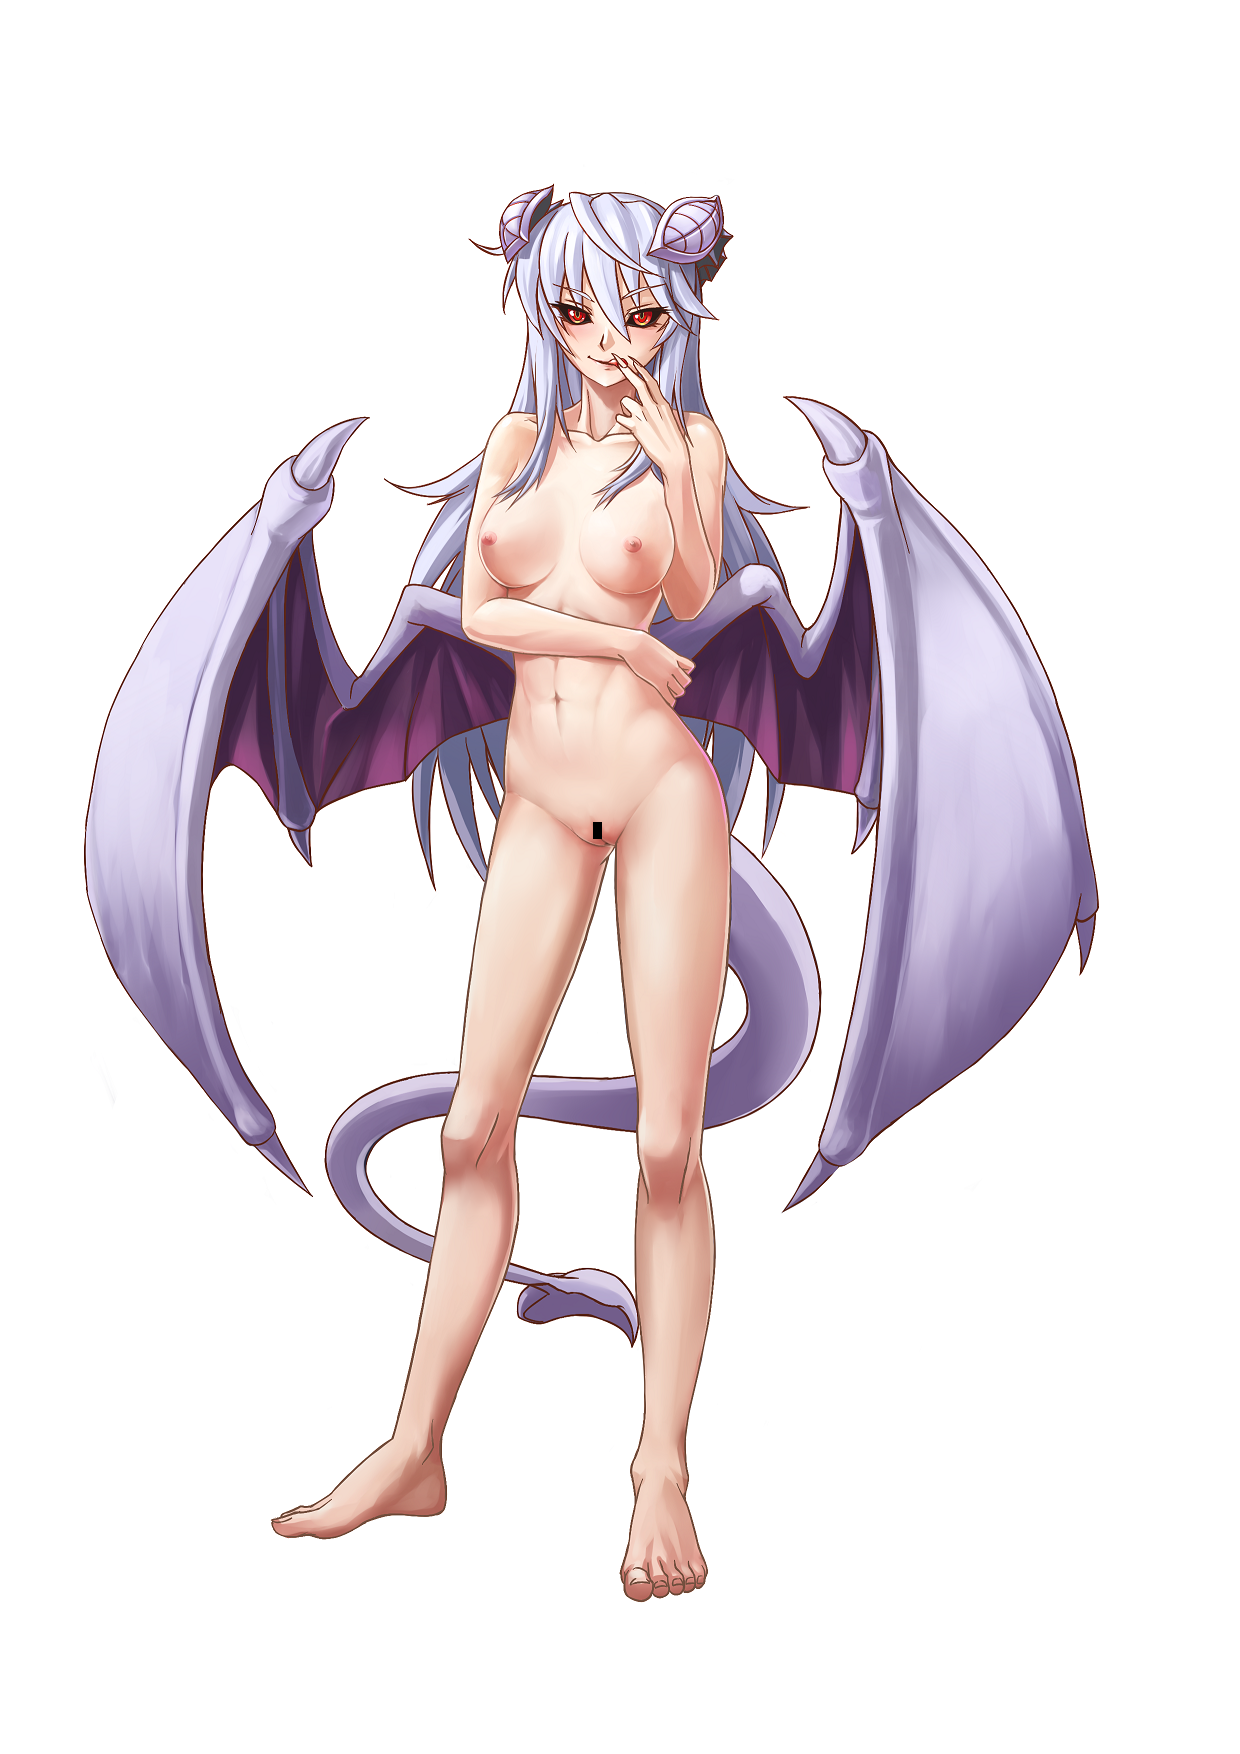 Monster girl nude chart - Porn archive